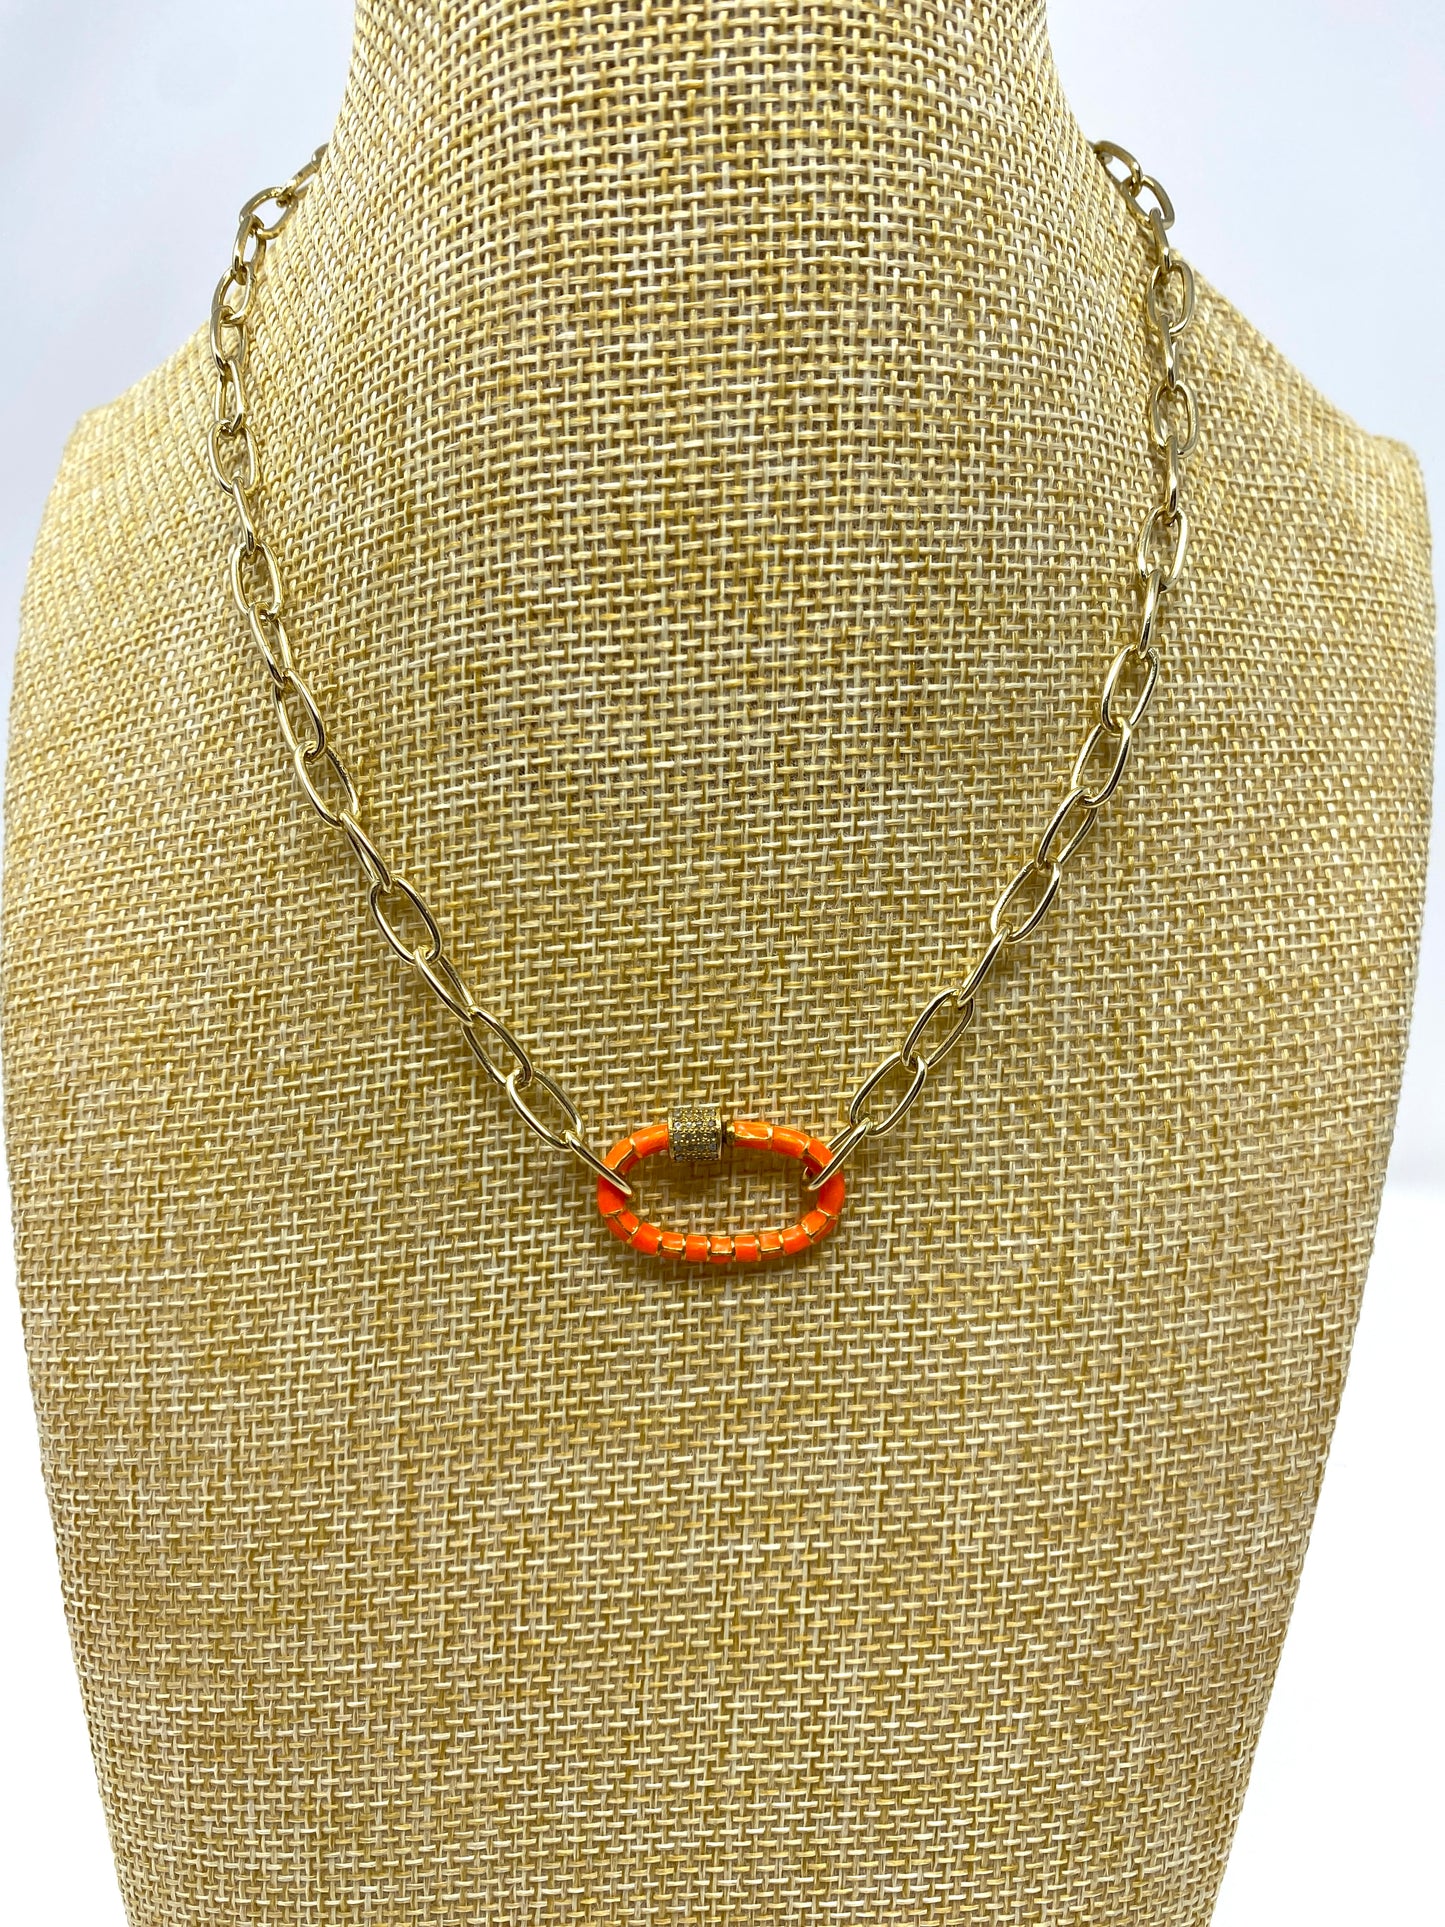 Gold Filled Necklace with Orange Enamel and Pave Diamond Carabiner